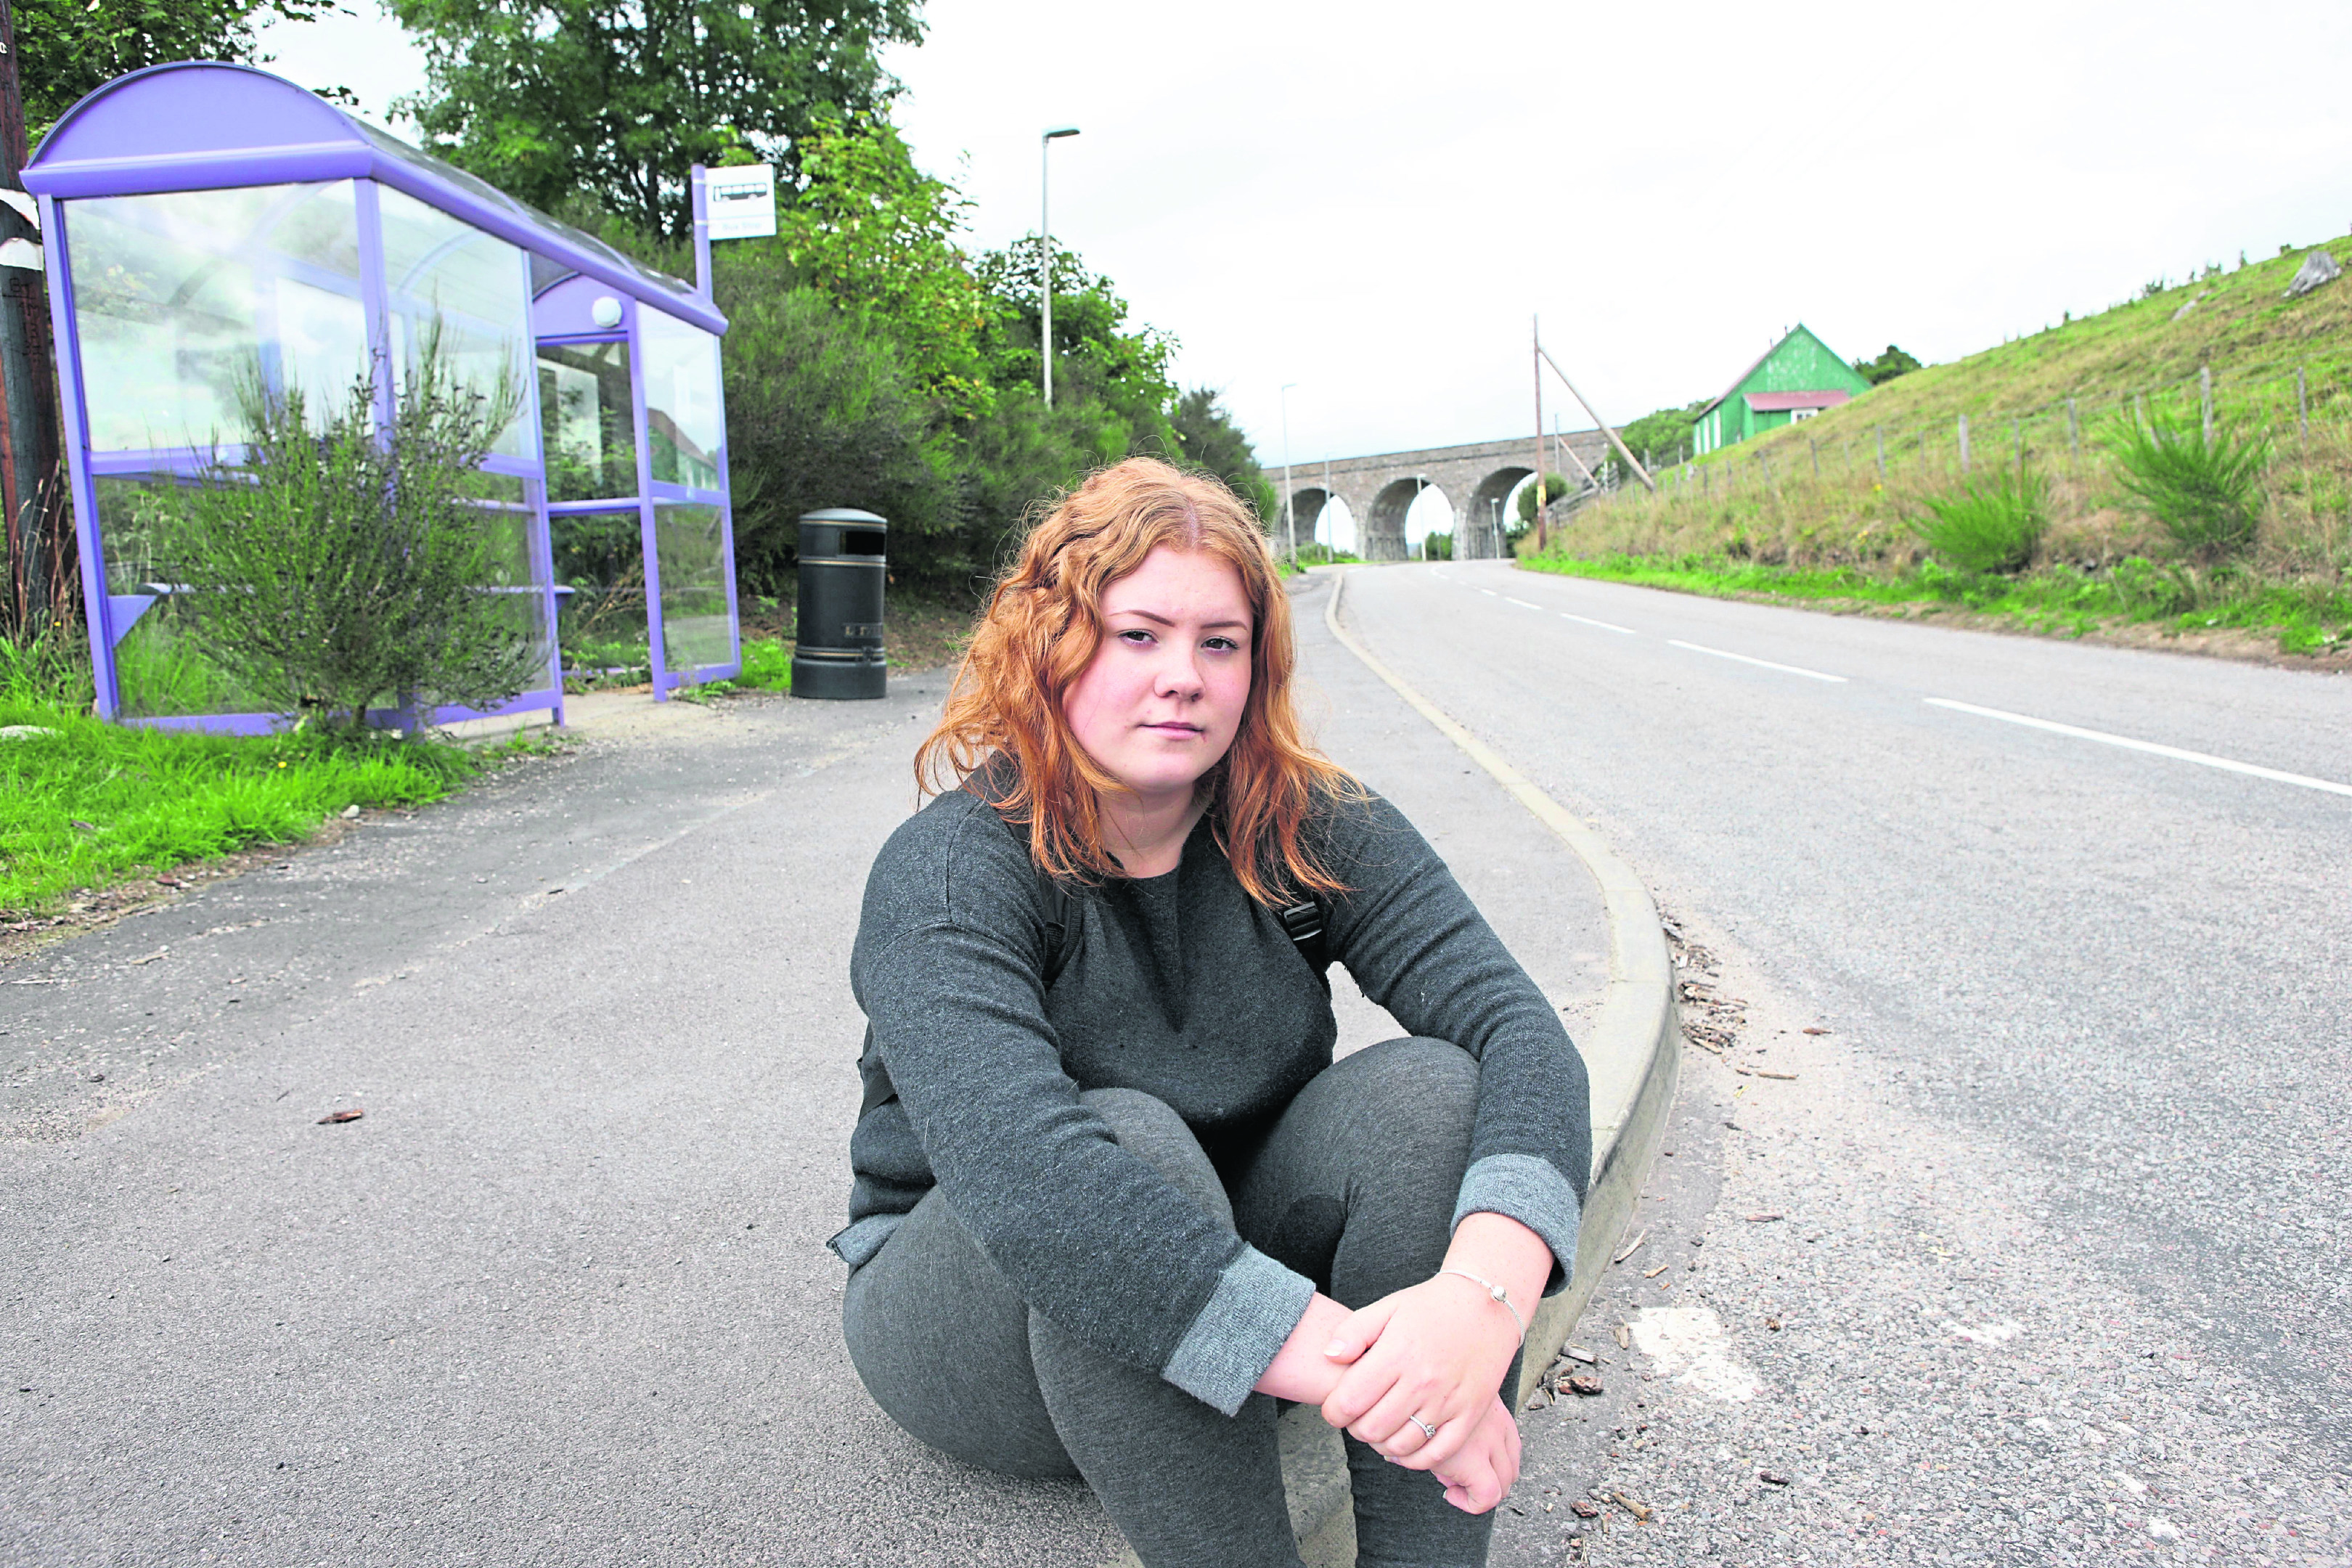 Jade Cornwall from Tomatin near Inverness who has had to turn down a job as she can't get public transport to the job.